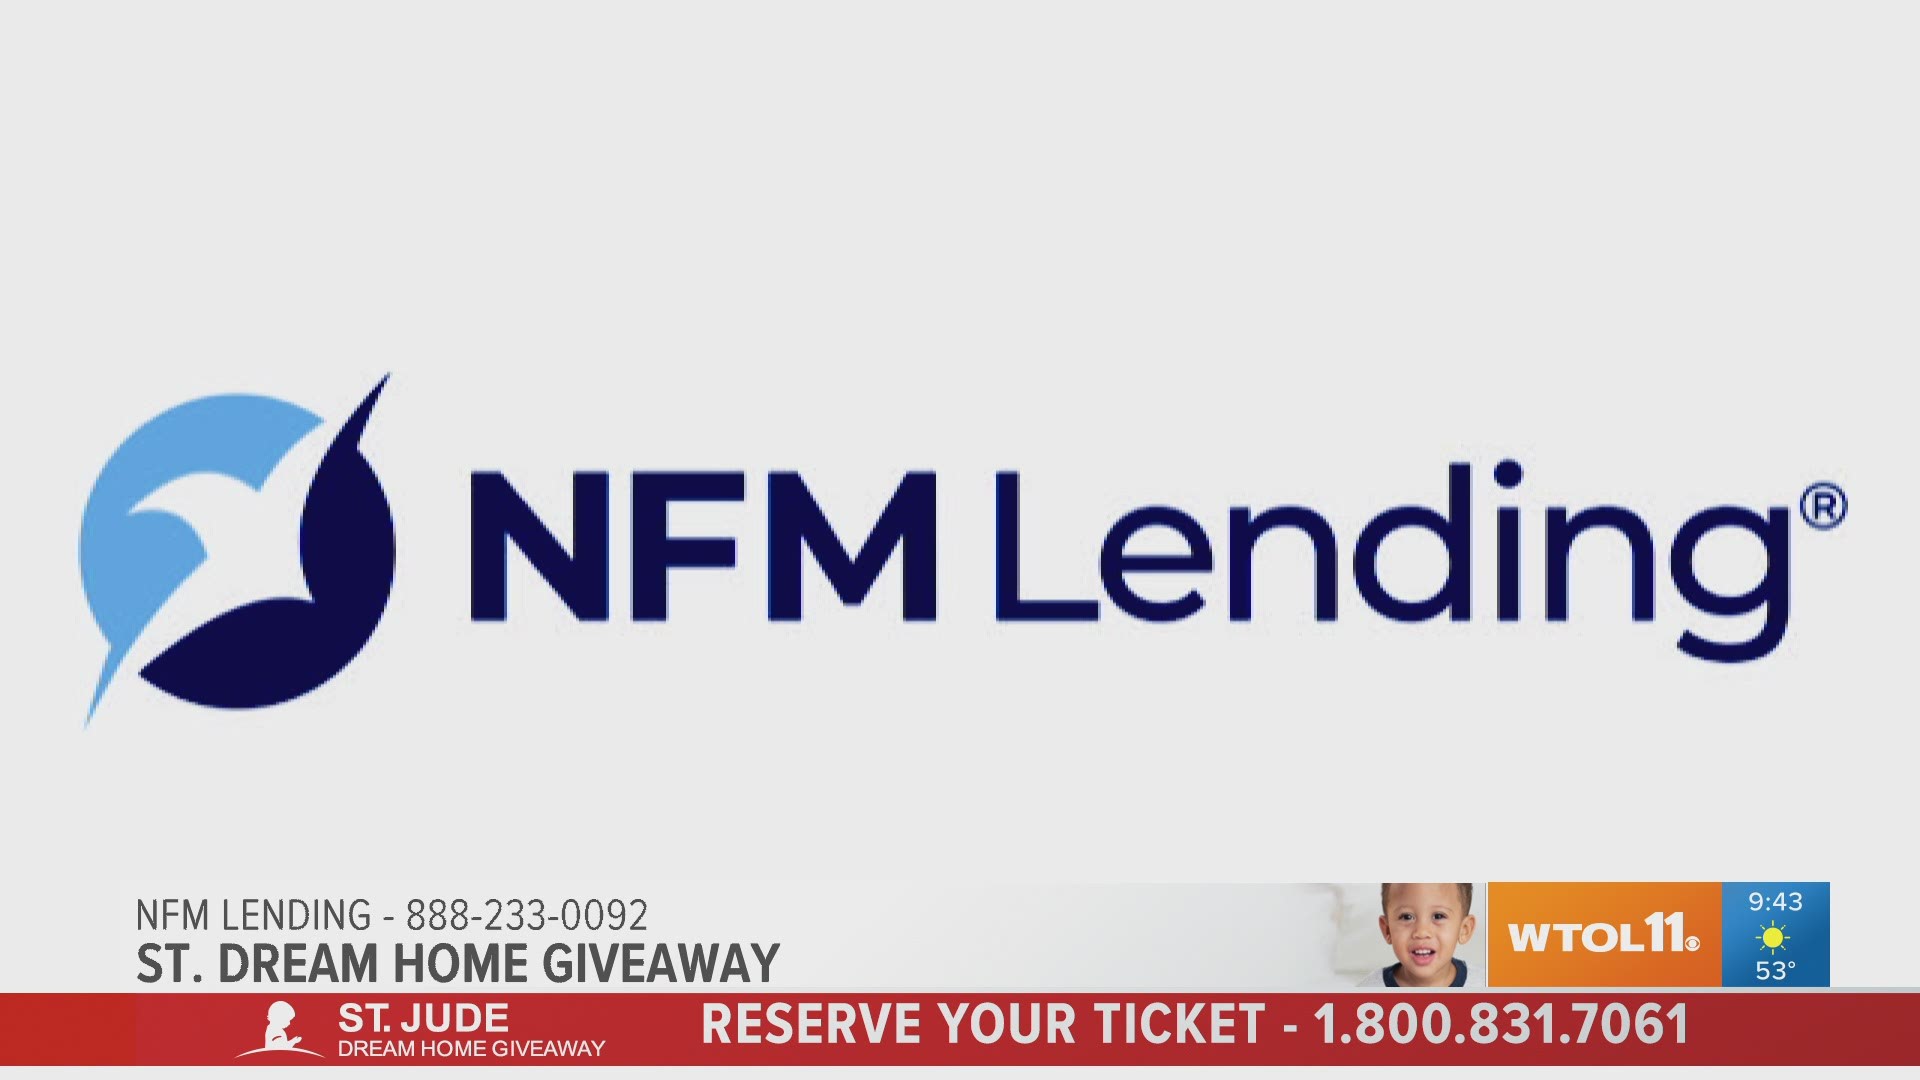 Buy your St. Jude Dream home ticket today to be entered to win a $5,000 Visa gift card from mortage lending company NFM Lending!